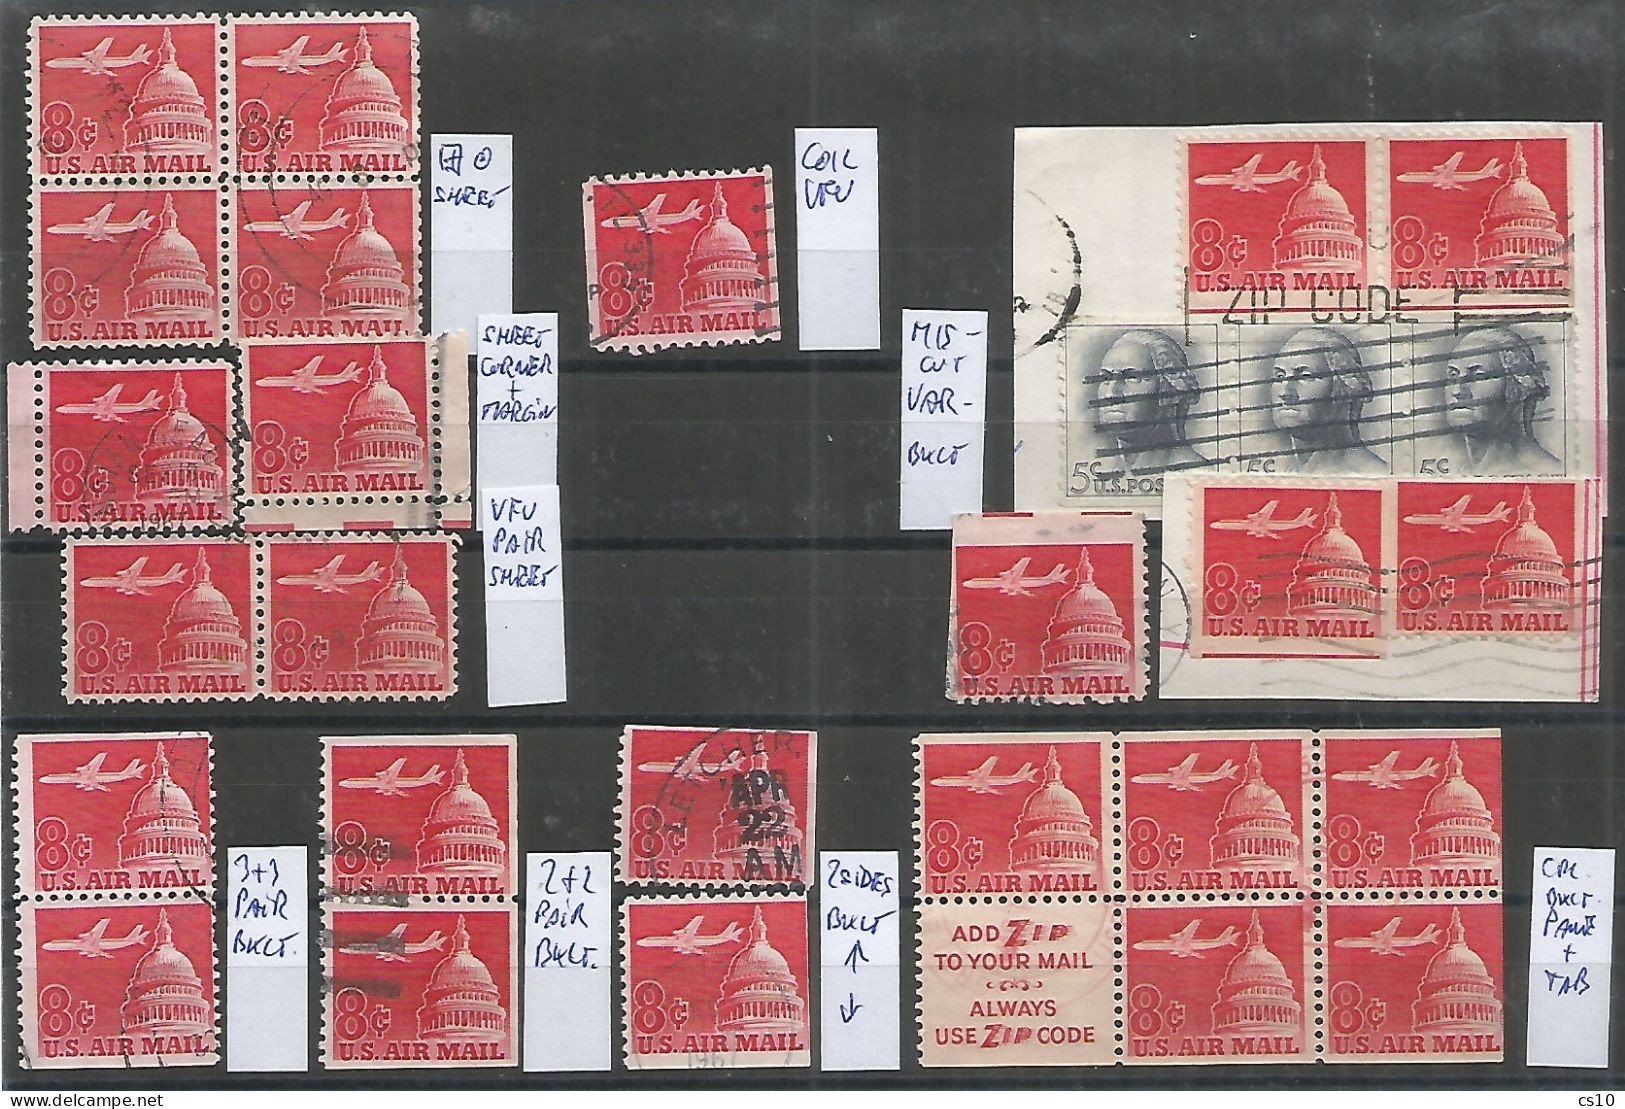 USA Airmail 1962 Jet & Capitol Dome SC# C64+65 Cpl Issue BL4 Sheet Coil Booklet Pane Pairs & Singles + Small Variety - Ruedecillas